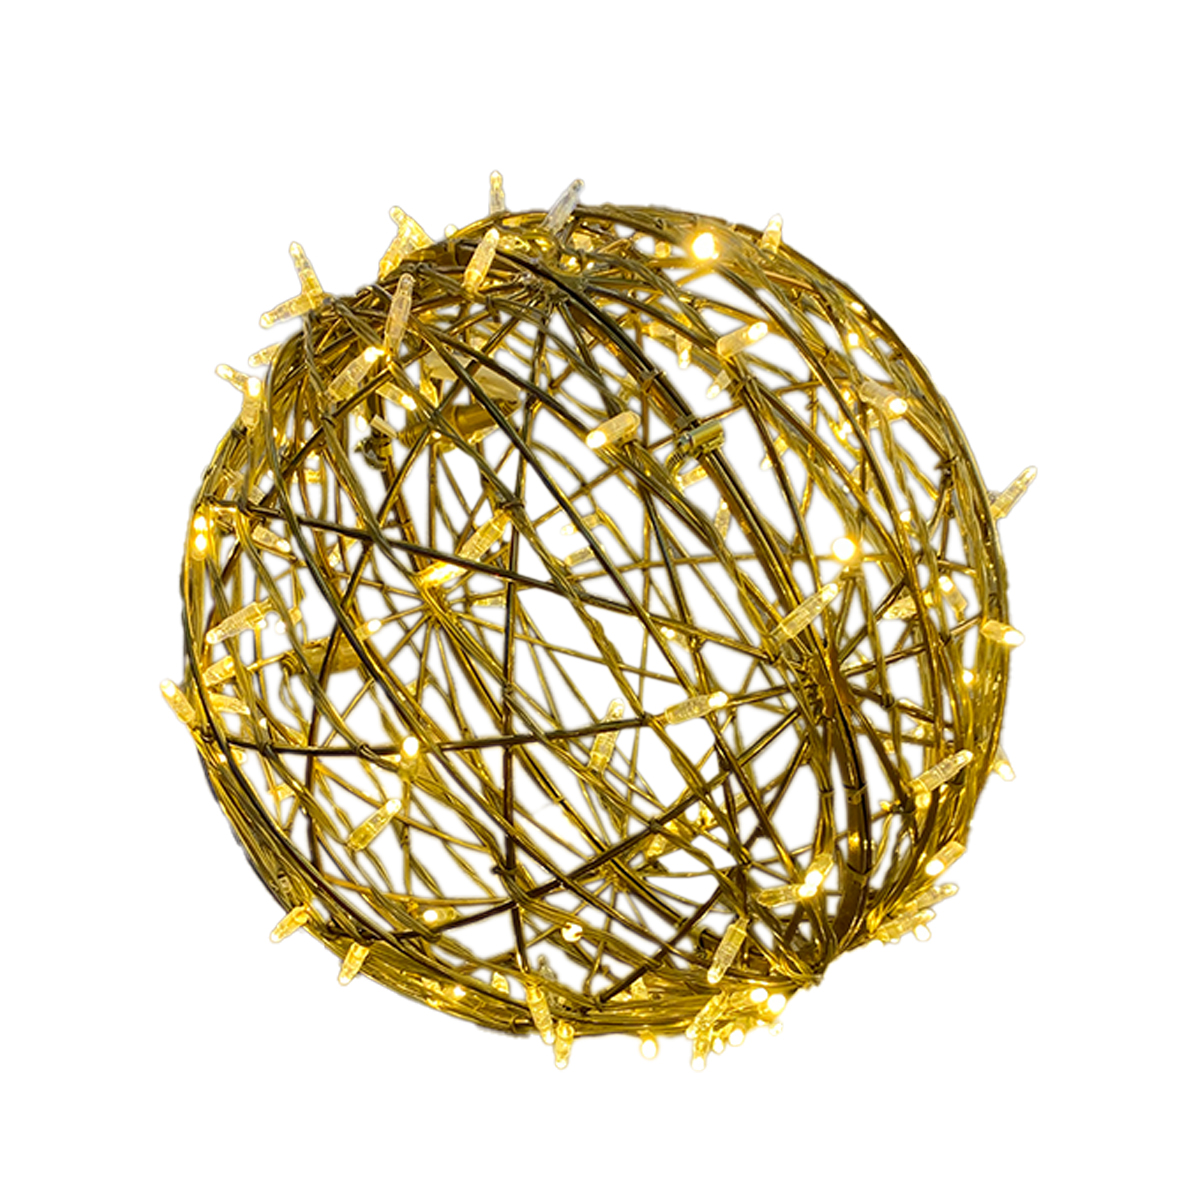 Gold Knitted Ball - Large Commercial Display - Super Bright LED Lights - 35” Diameter